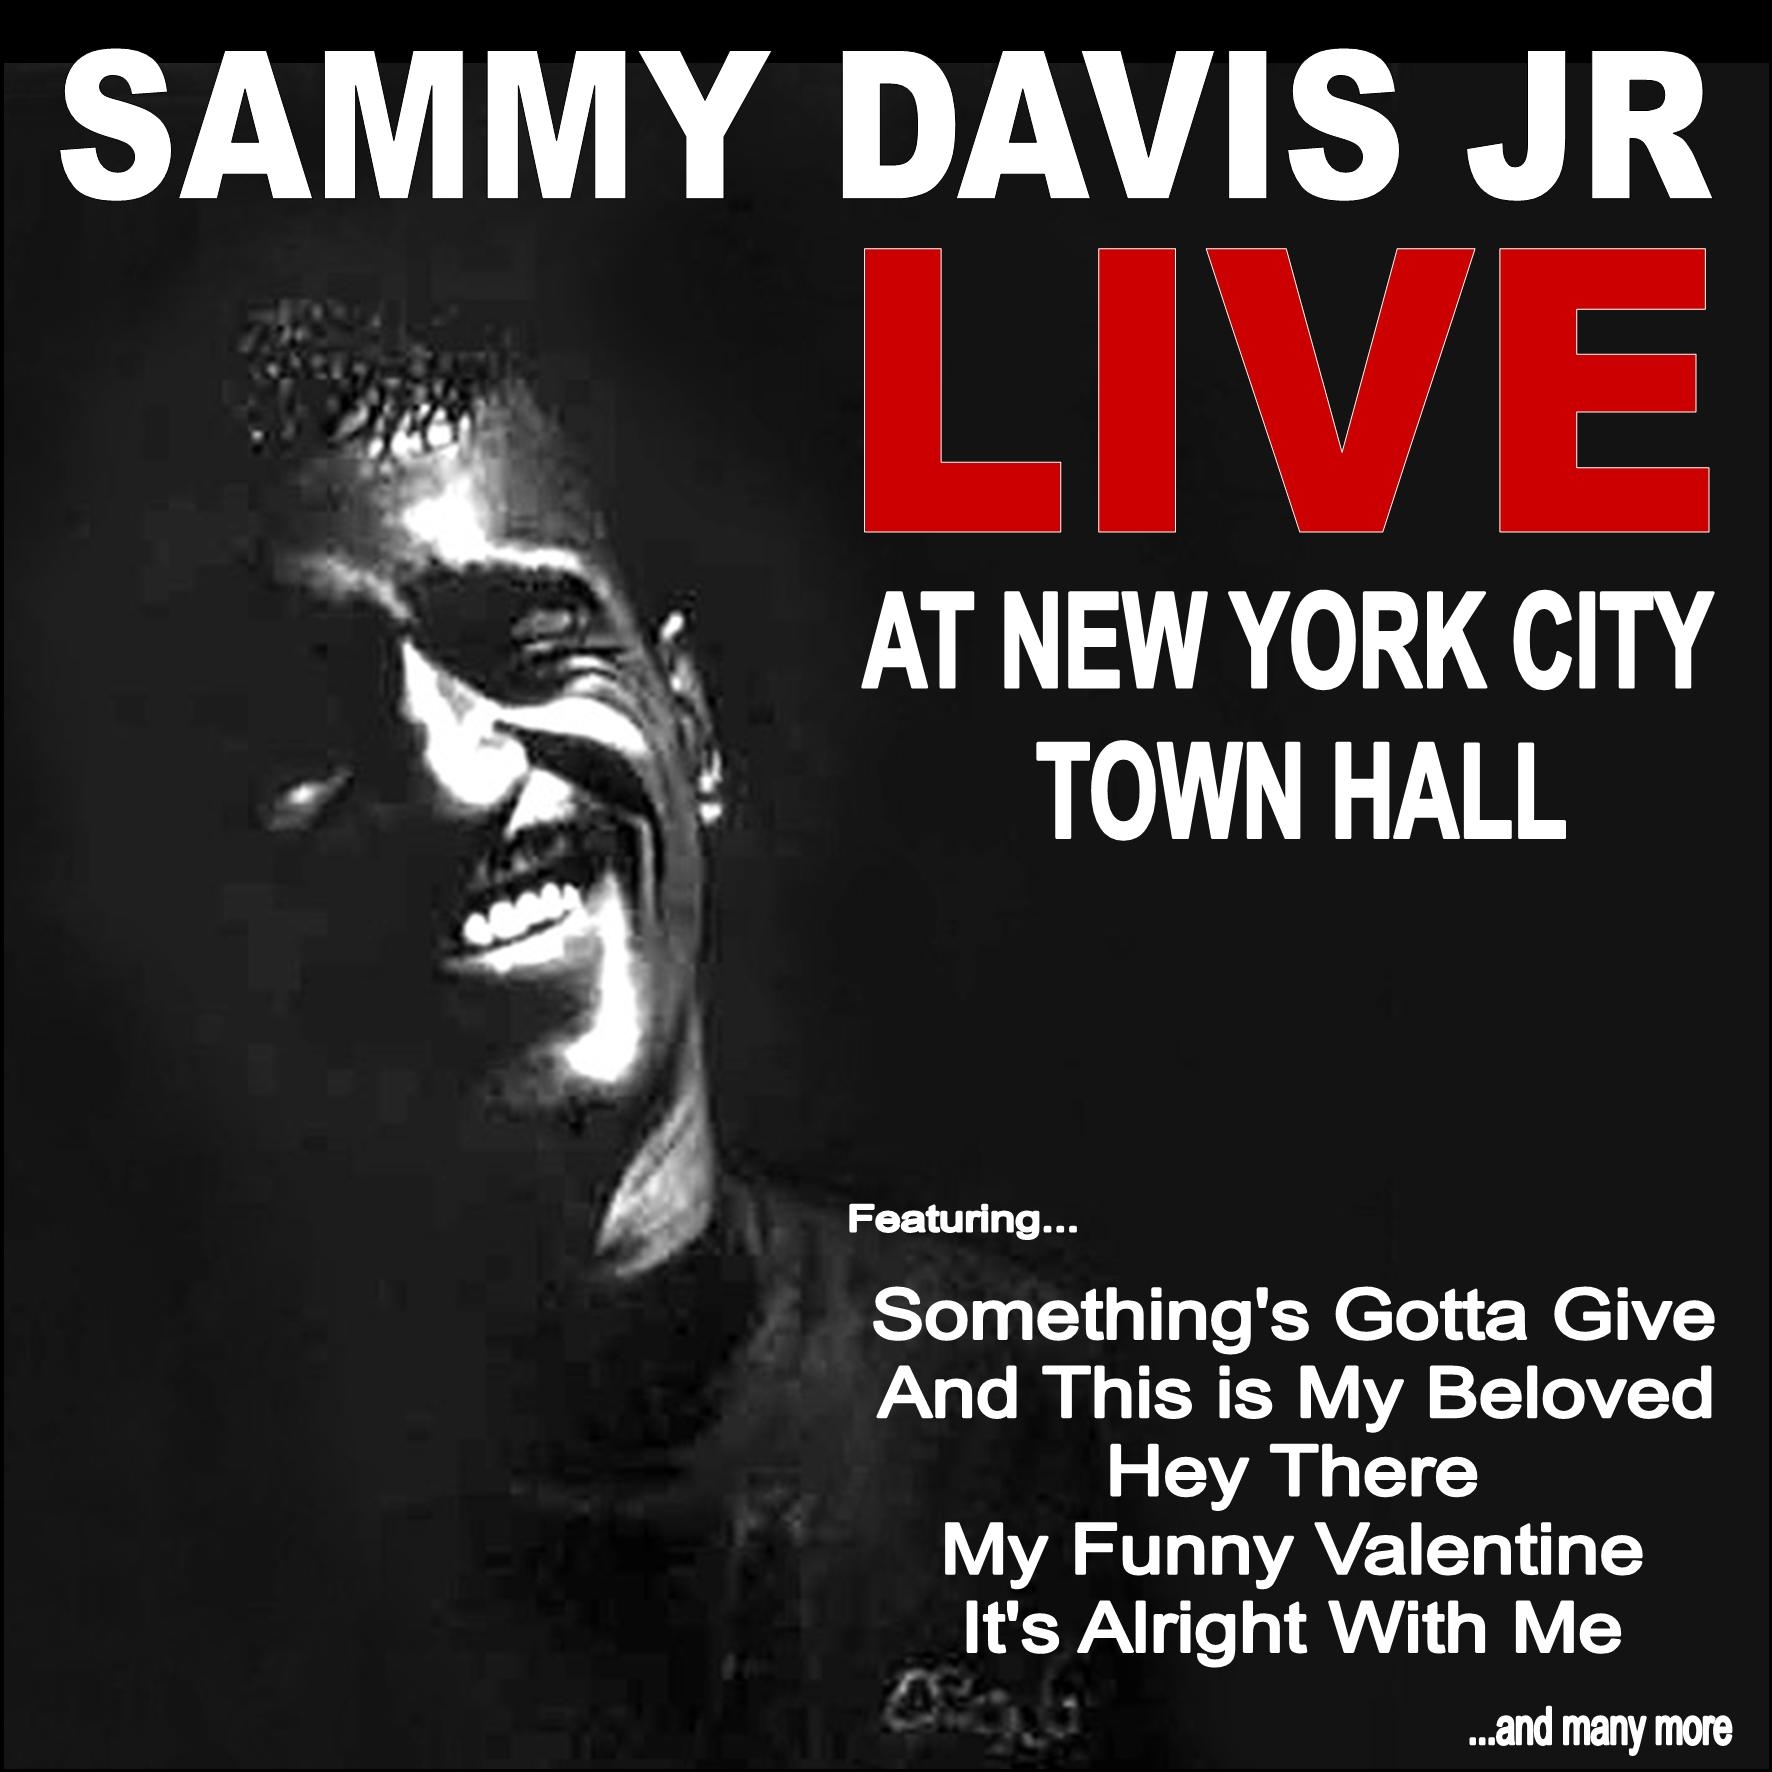 Live at New York City Town Hall